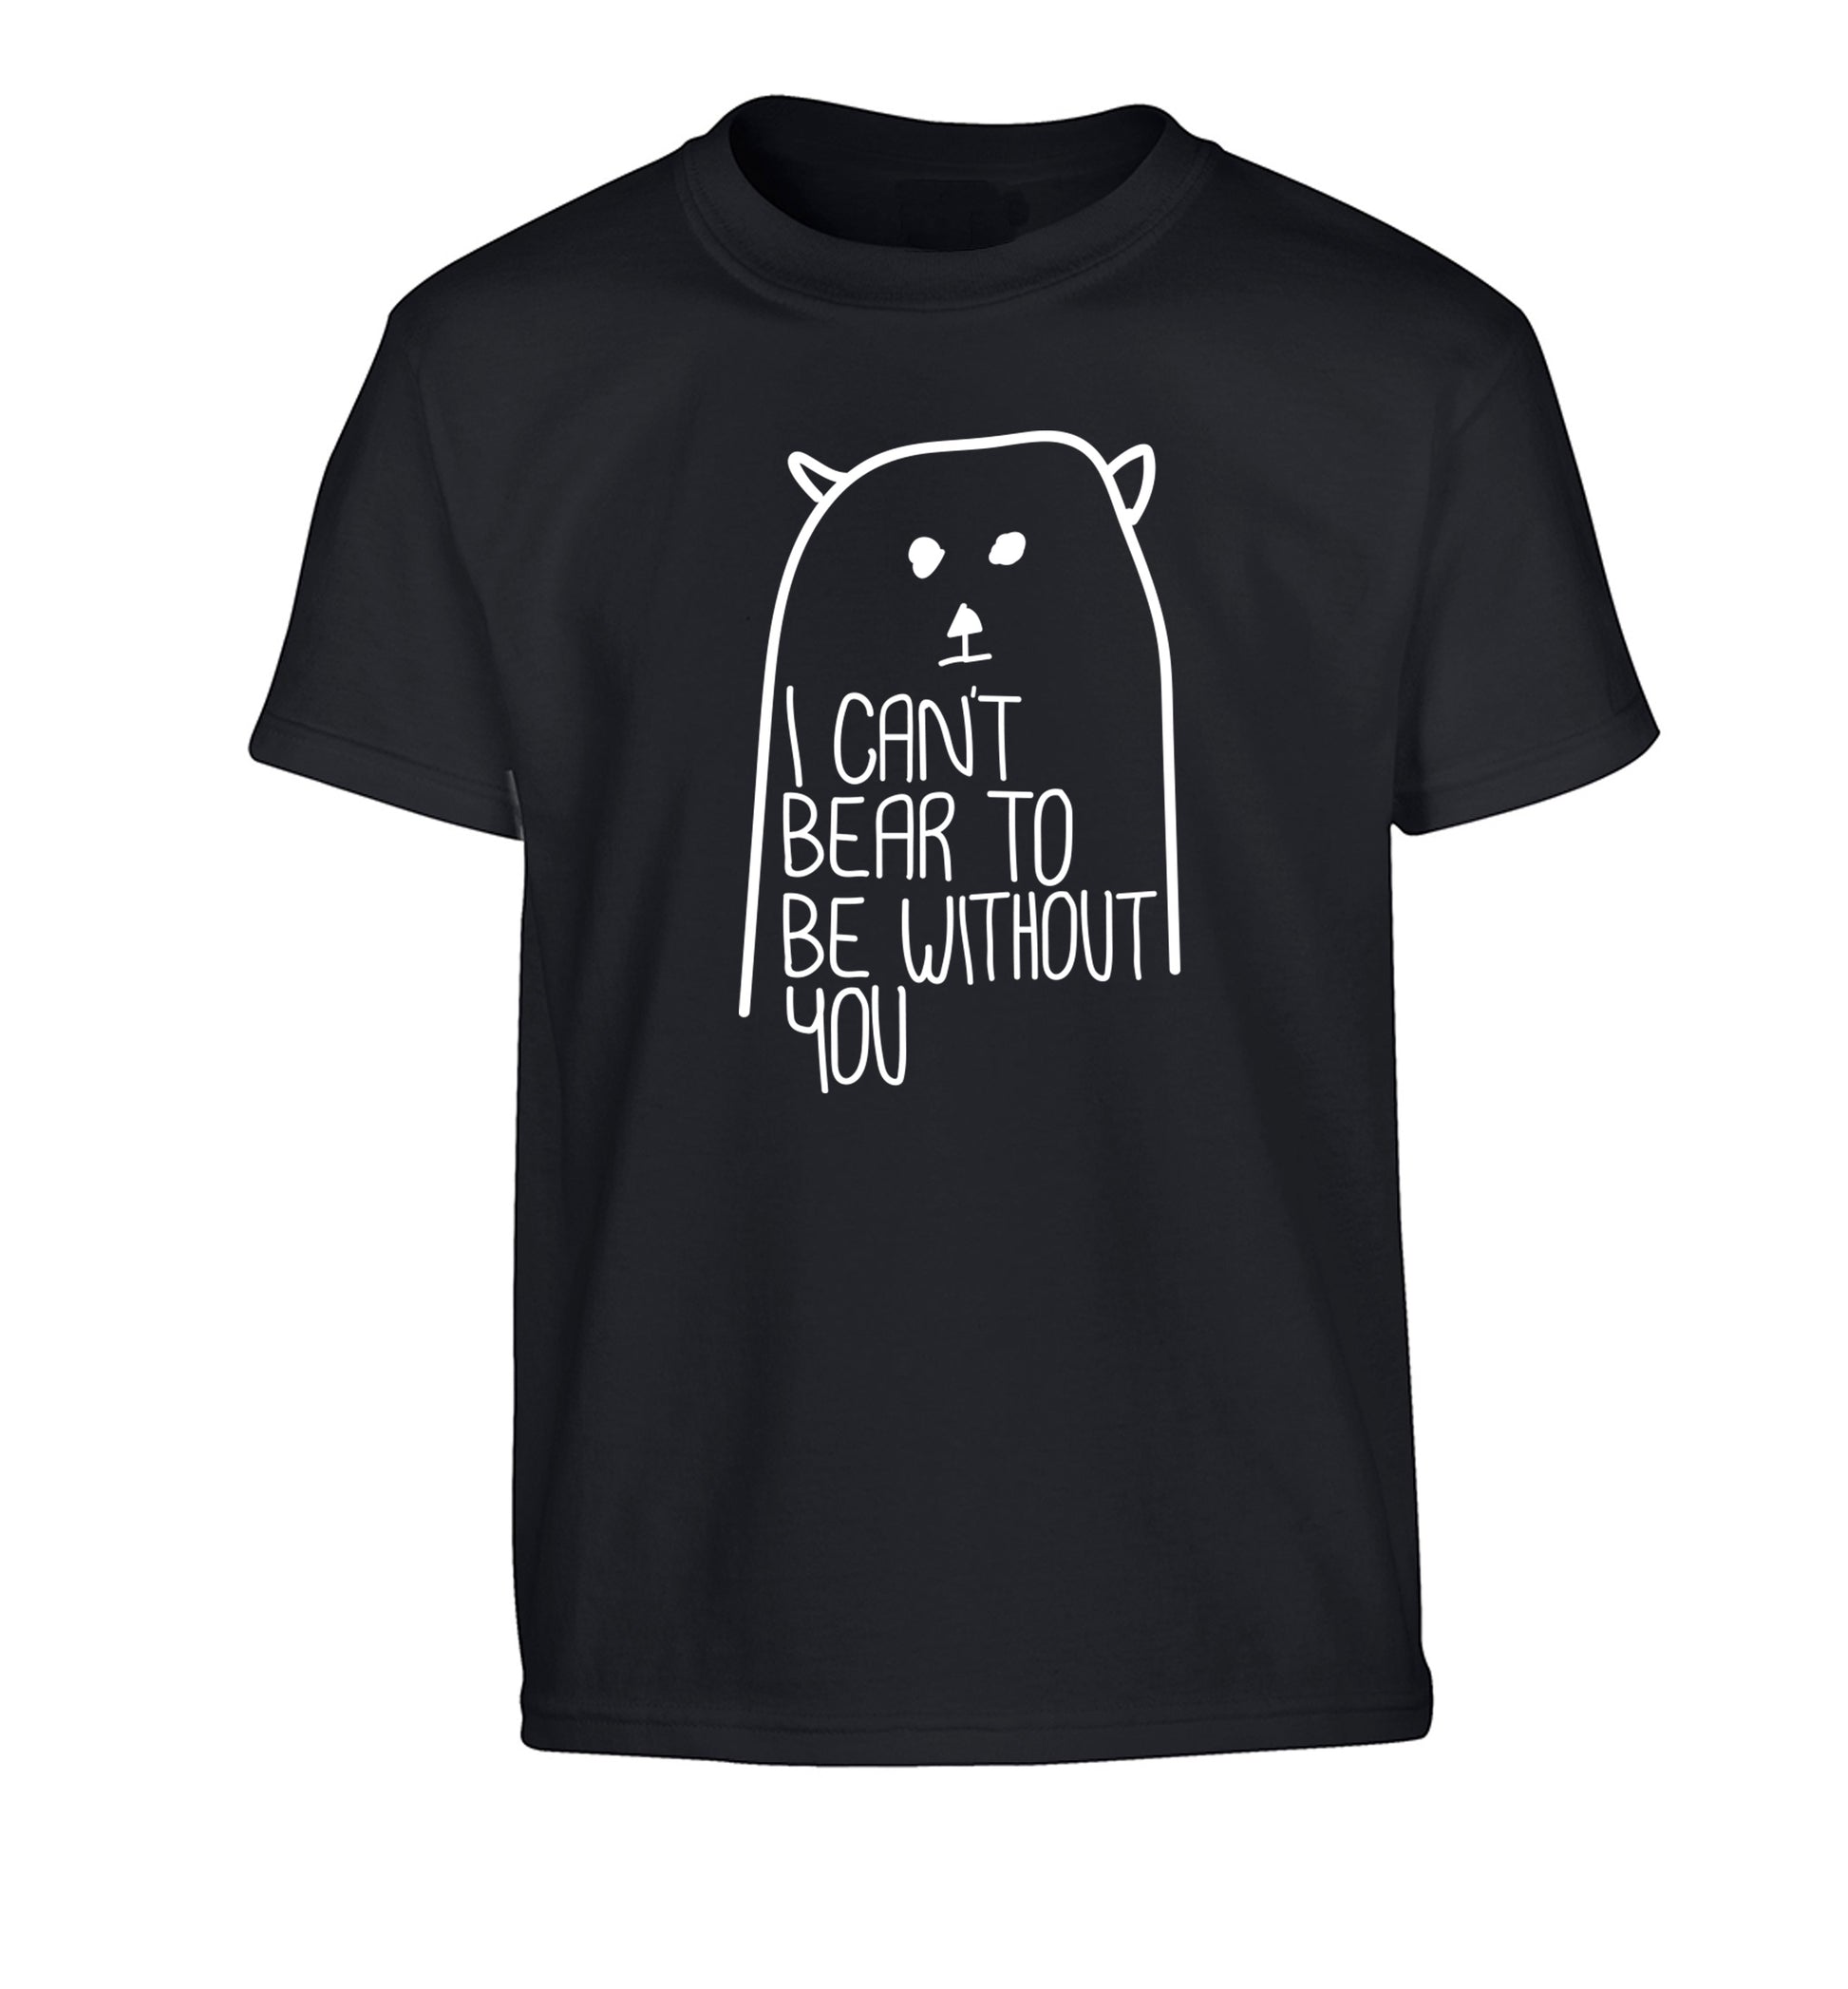 I can't bear to be without you Children's black Tshirt 12-13 Years